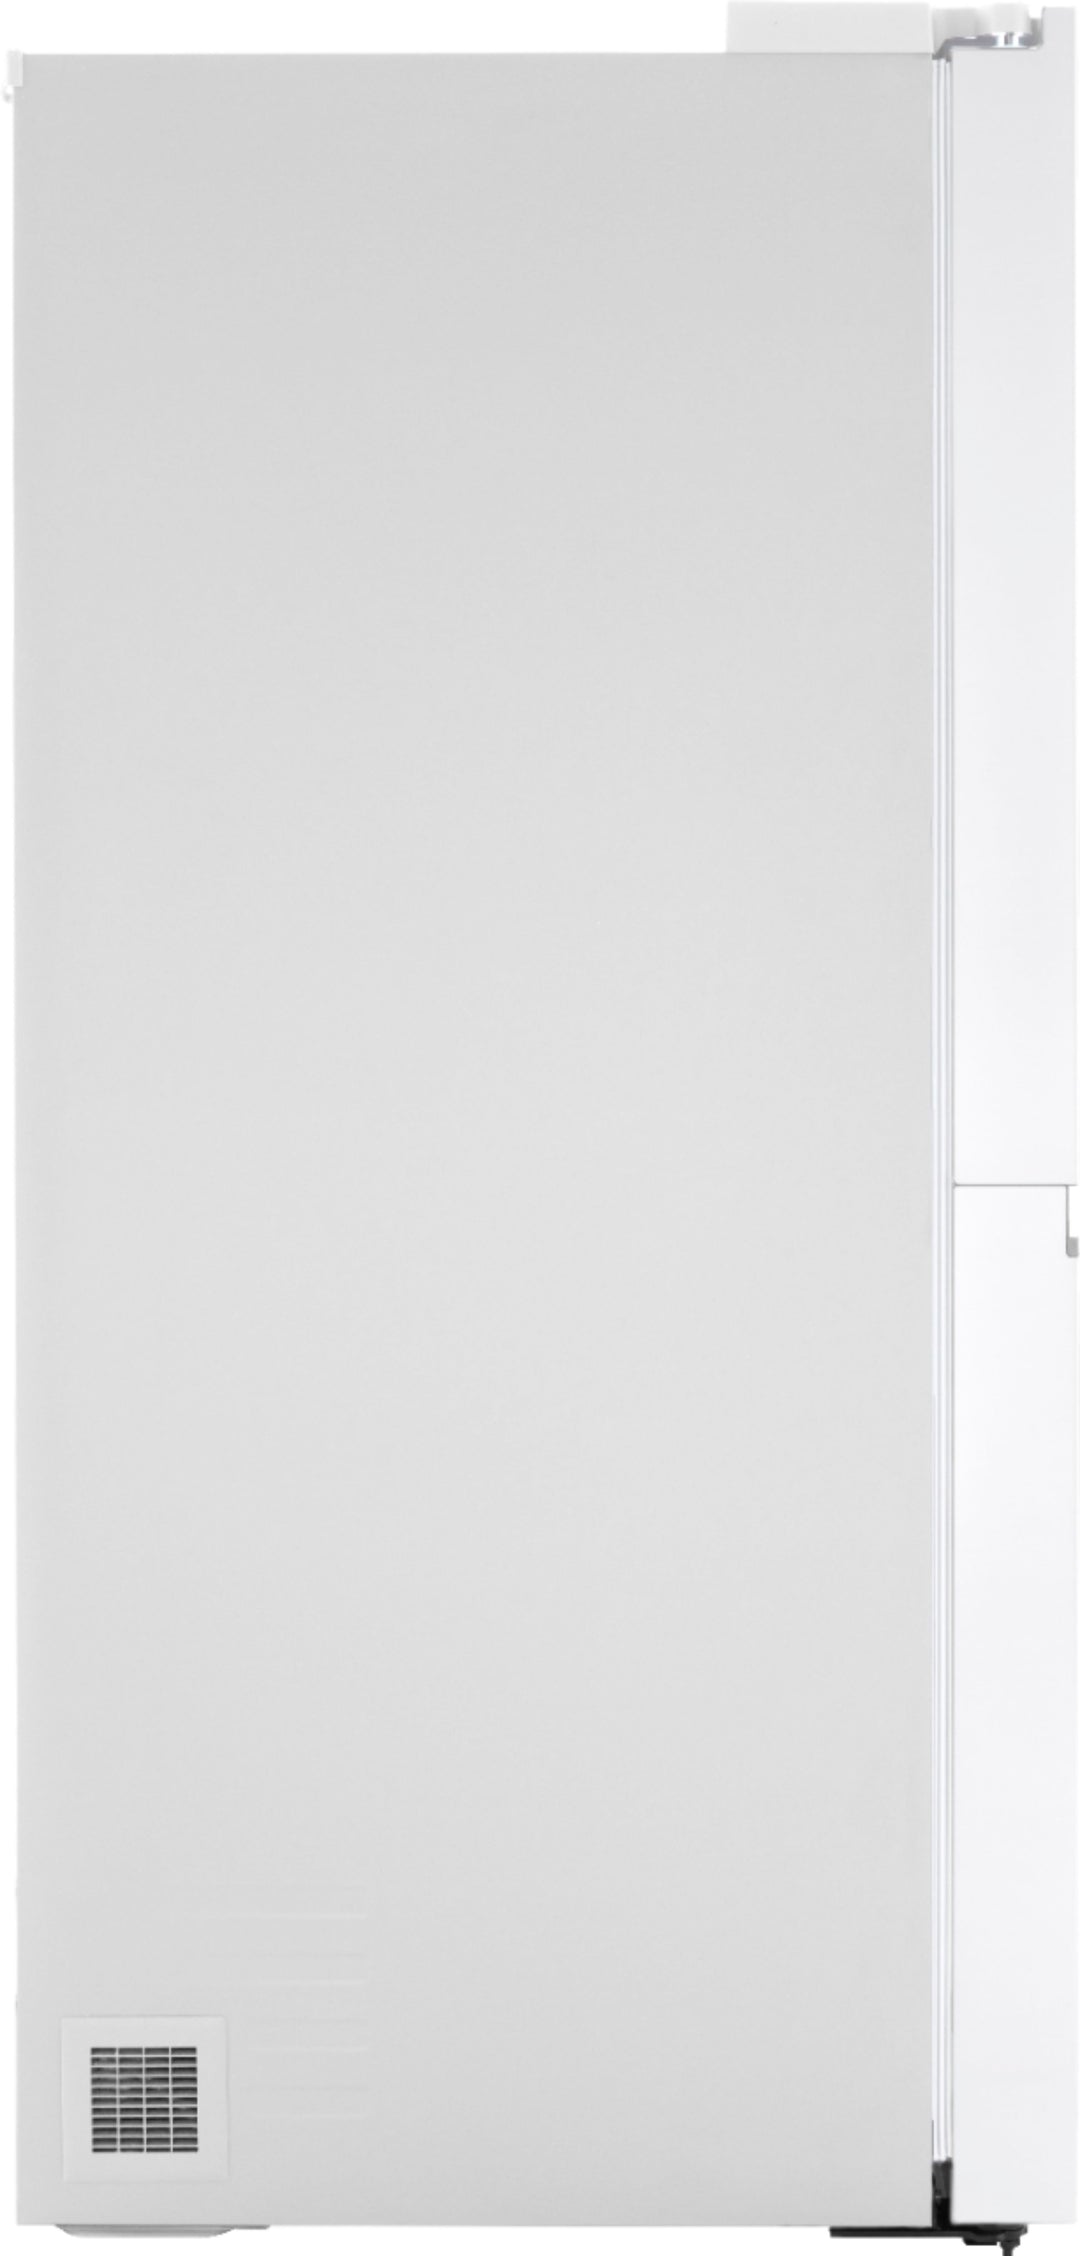 LG - 27.2 cu ft Side by Side Refrigerator with SpacePlus Ice - Smooth white_17